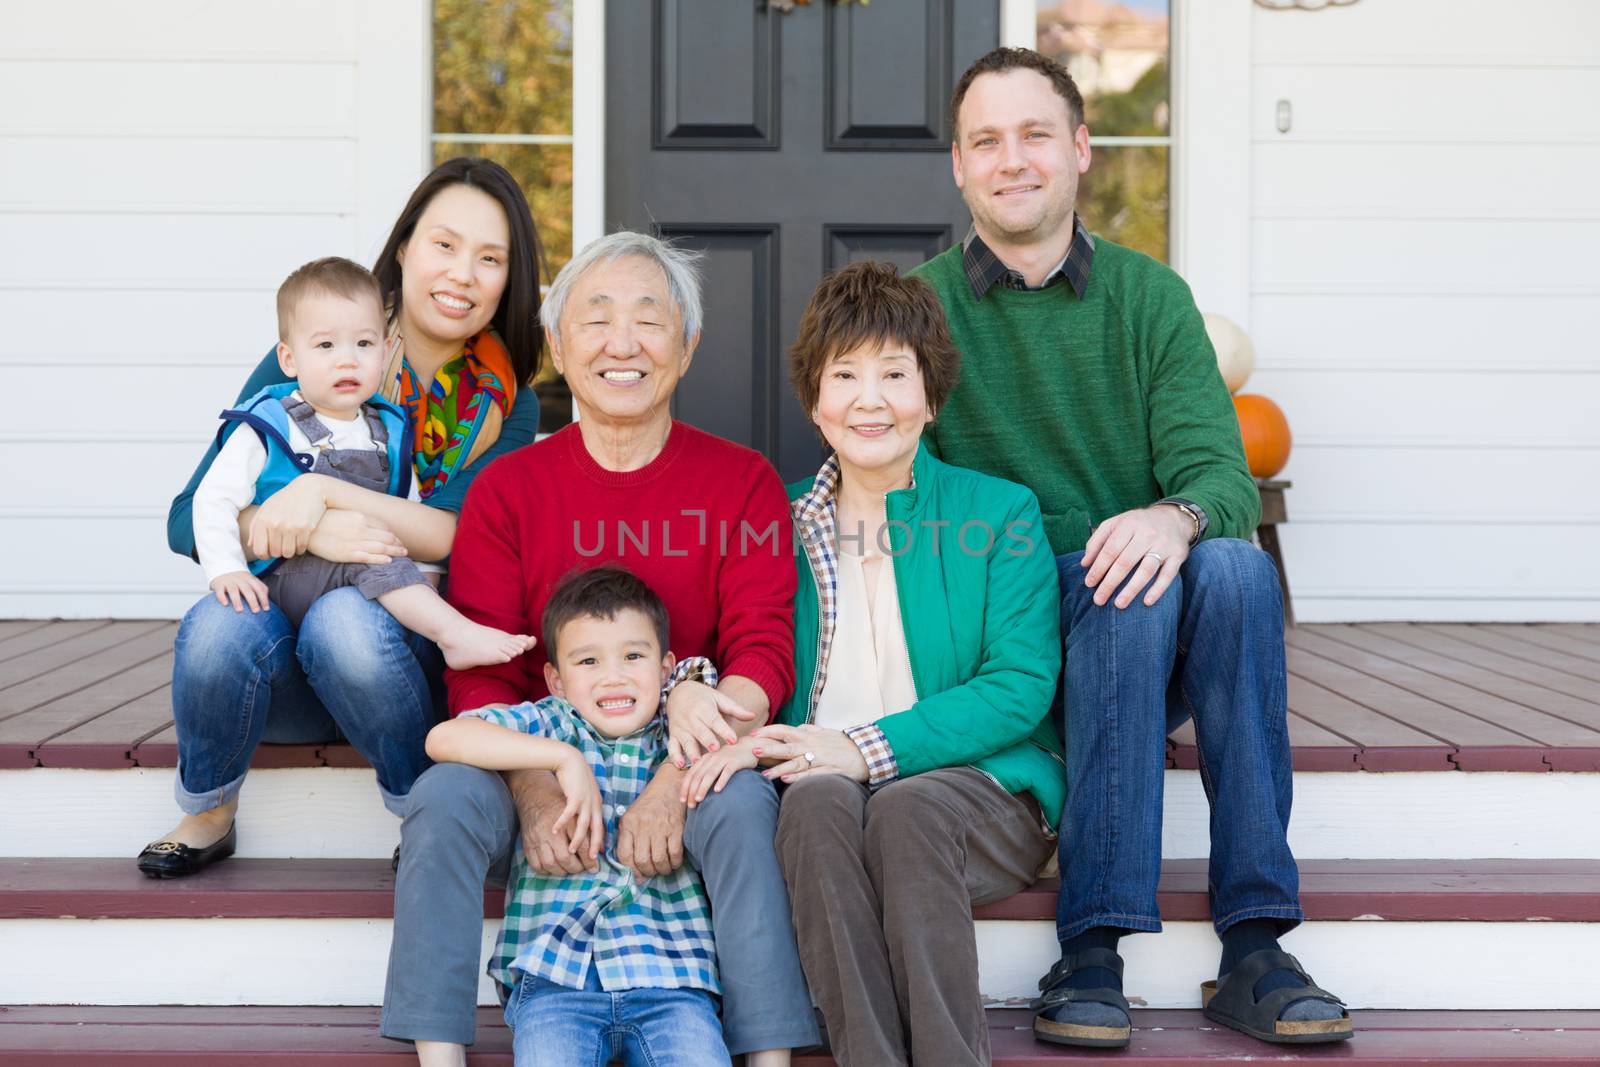 Multi-generation Chinese and Caucasian Family Portrait